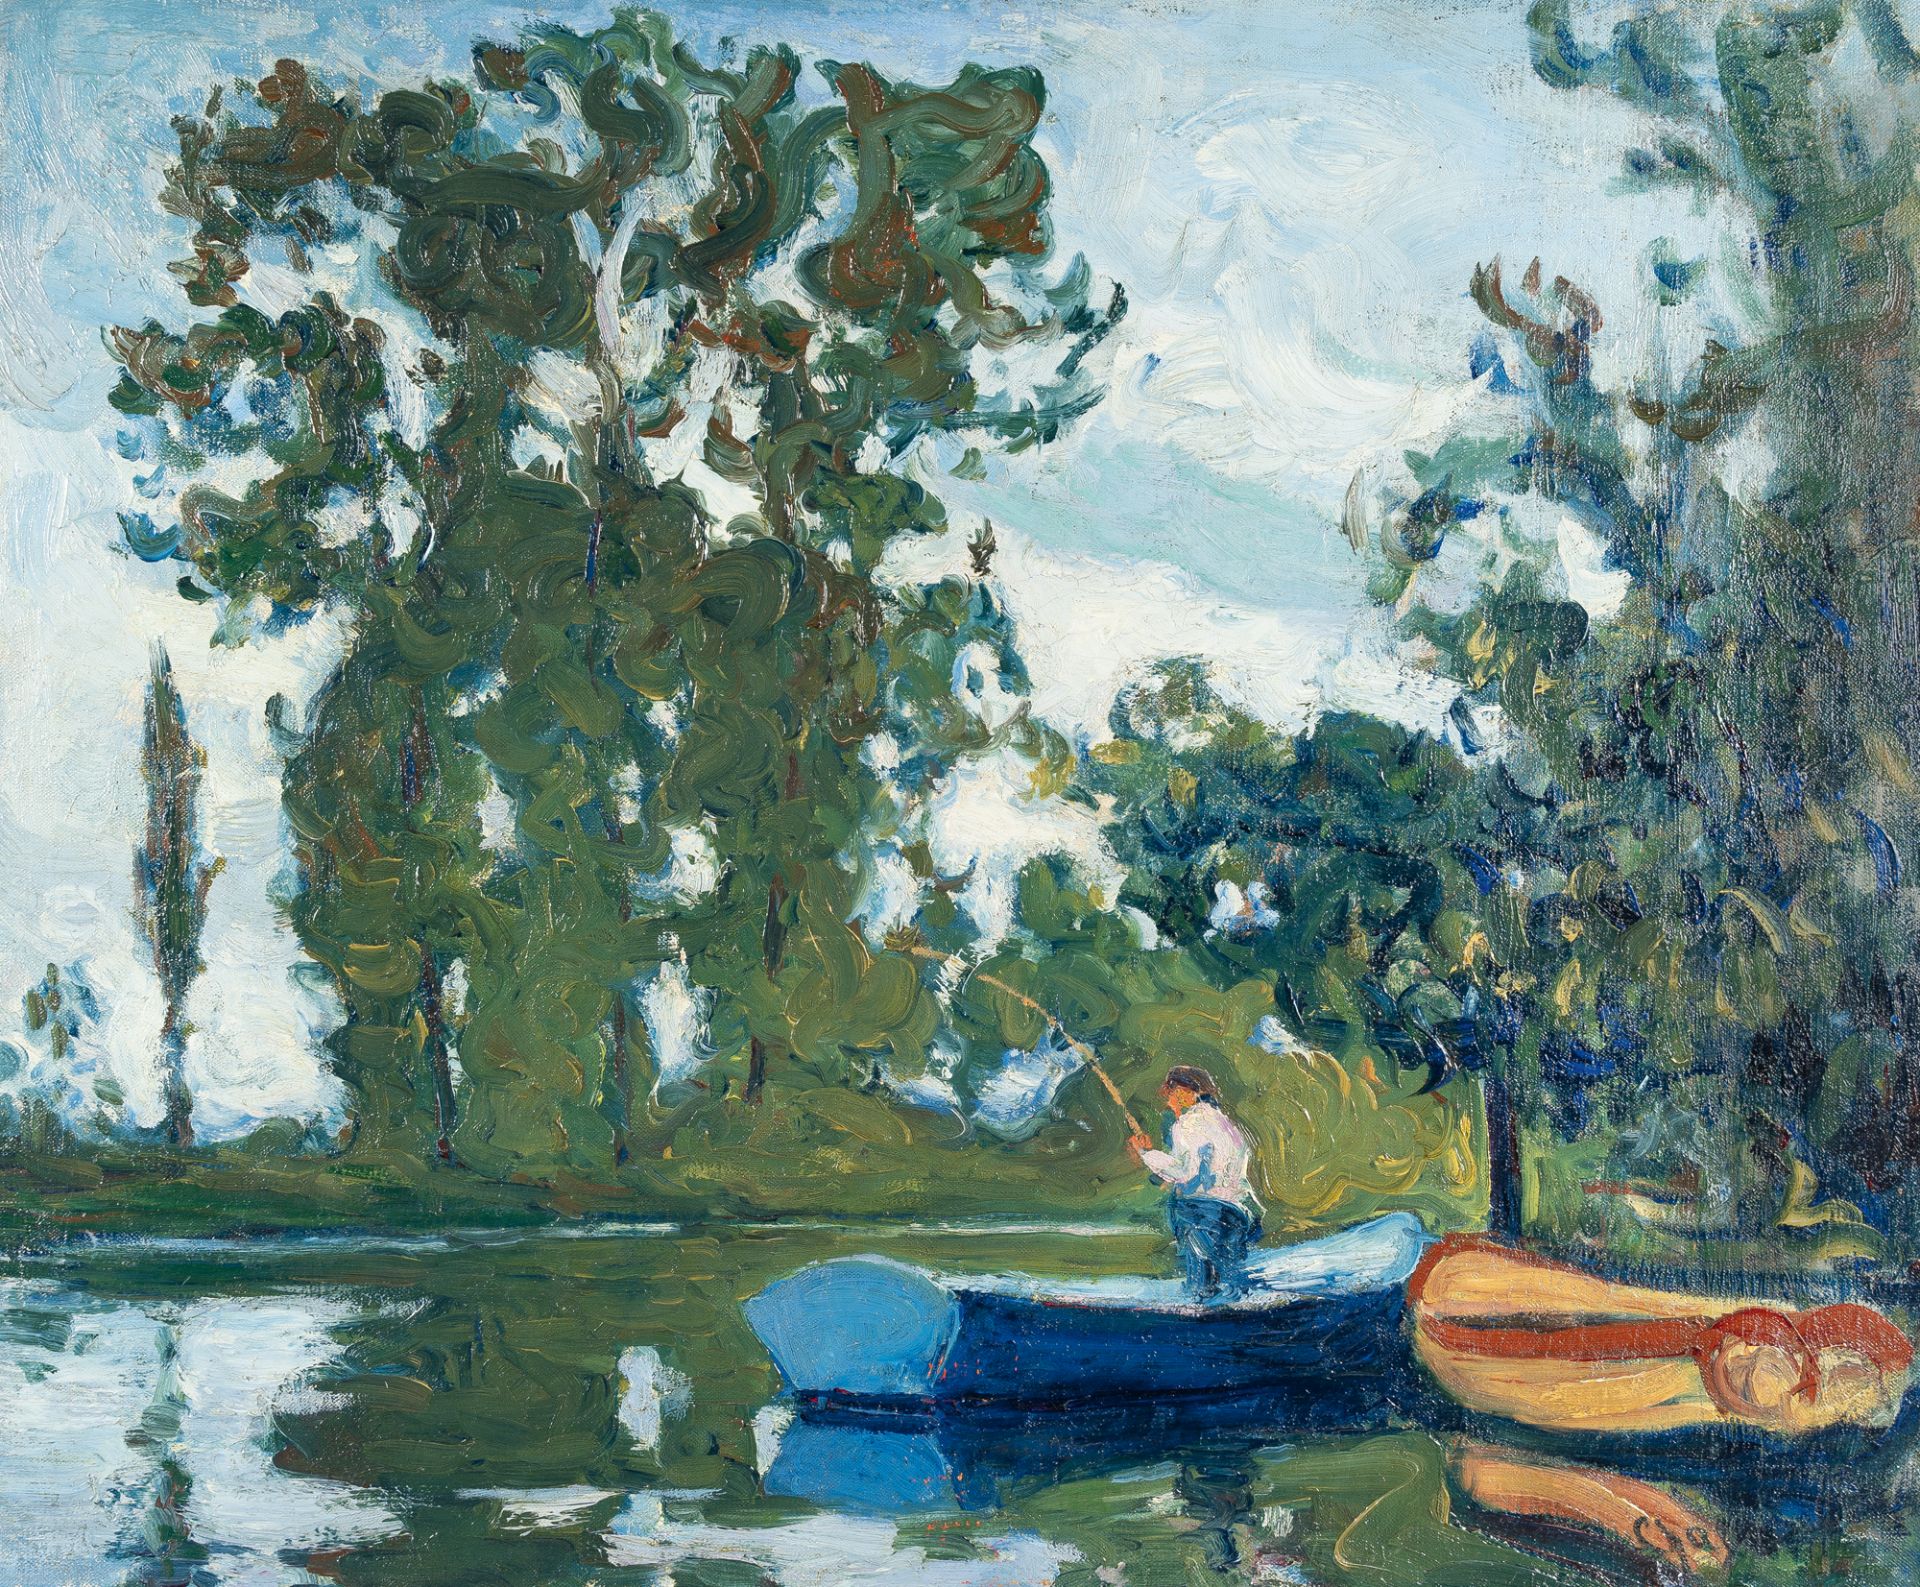 Jean-Laurent Buffet-Challié – Fisherman in a barge on a woodland pond